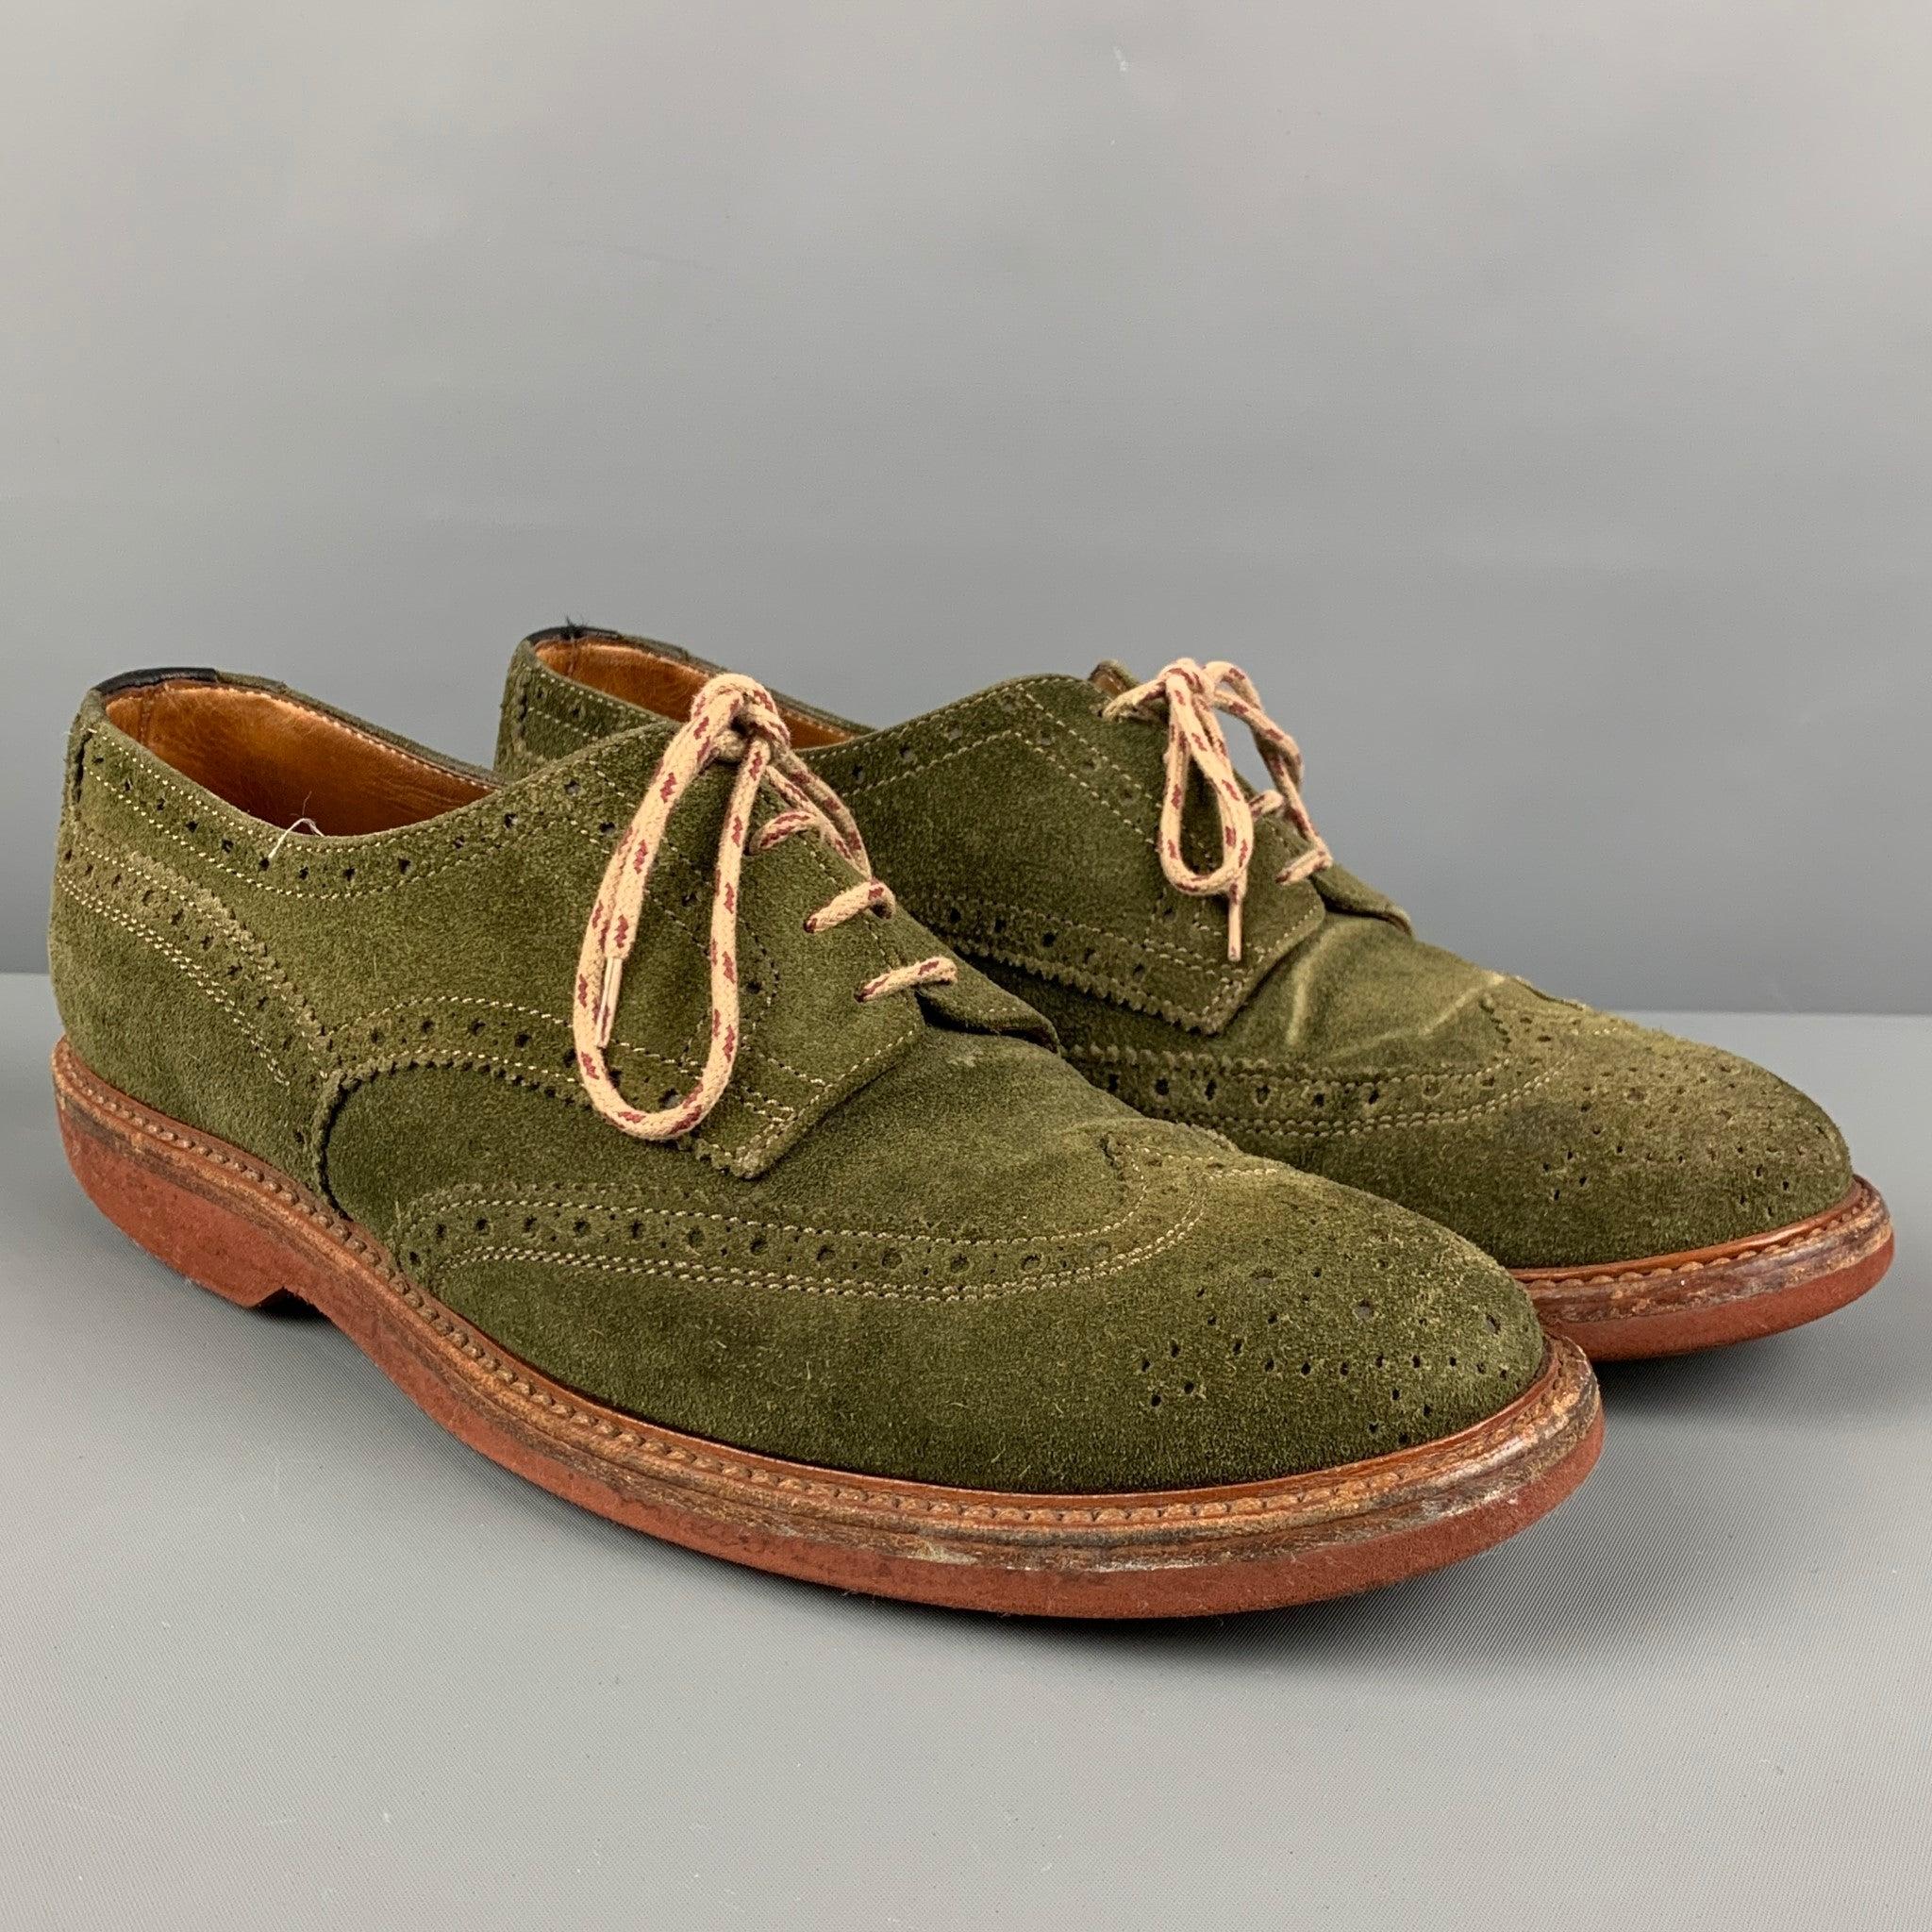 BRUNELLO CUCINELLI shoes comes in a olive suede featuring a wingtip style, contrast stitching, and a lace up closure. Includes box. Made in Italy.
Good
Pre-Owned Condition. Light wear.  

Marked:   42Outsole: 12 inches  x 4.25 inches 
  
  
